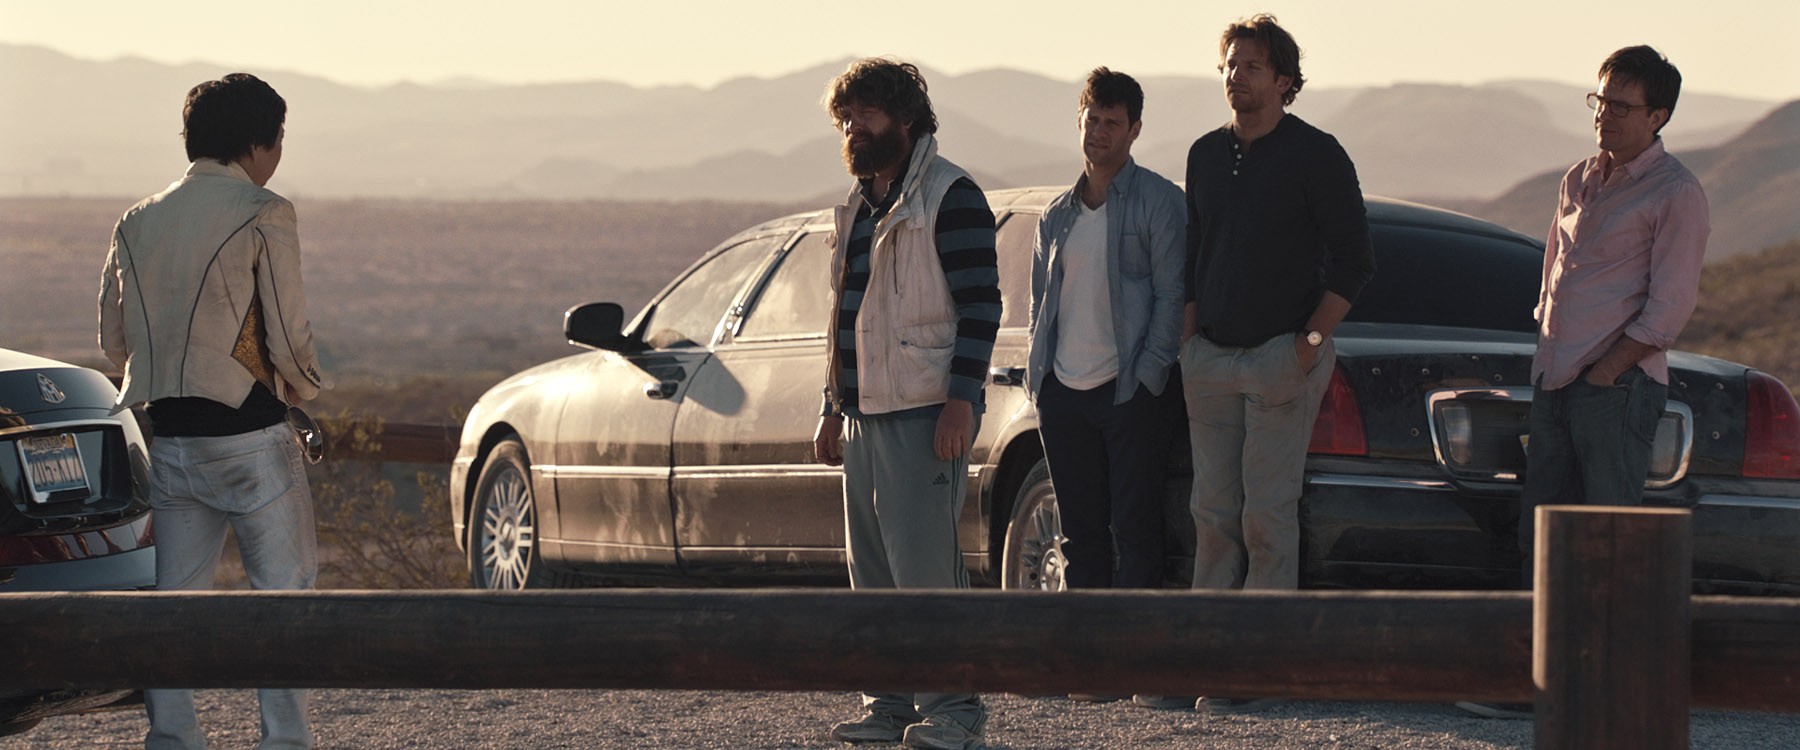 Ken Jeong, Zach Galifianakis, Justin Bartha, Bradley Cooper and Ed Helms in Warner Bros. Pictures' The Hangover Part III (2013)